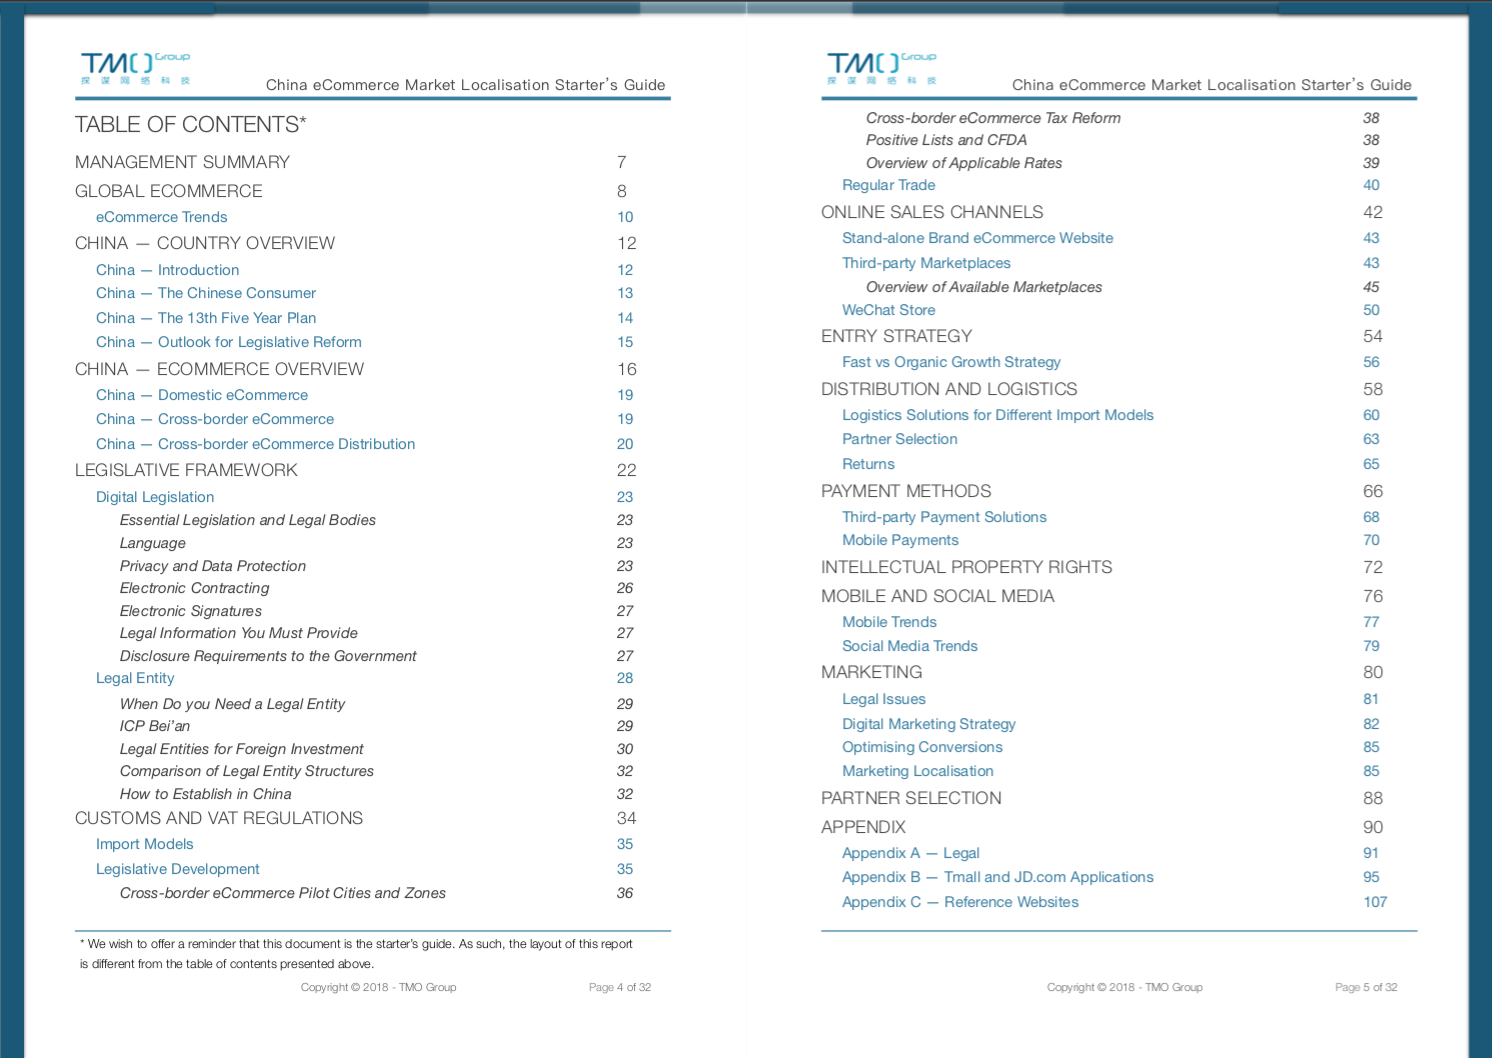 China eCommerce Market Localisation Starter's Guide - Table of Contents